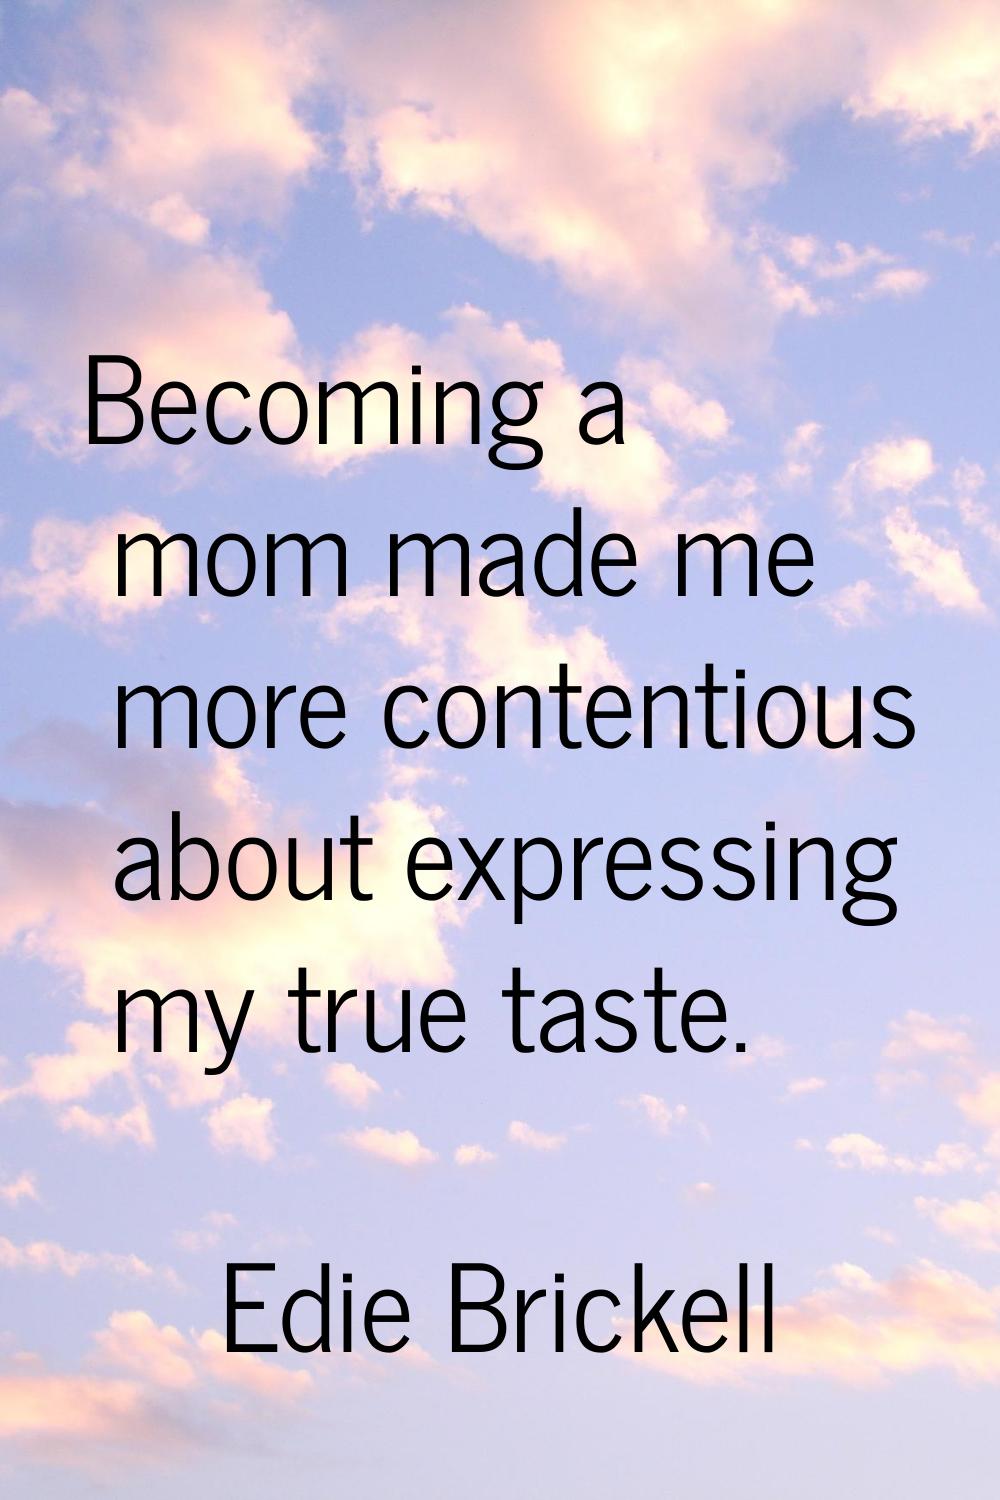 Becoming a mom made me more contentious about expressing my true taste.